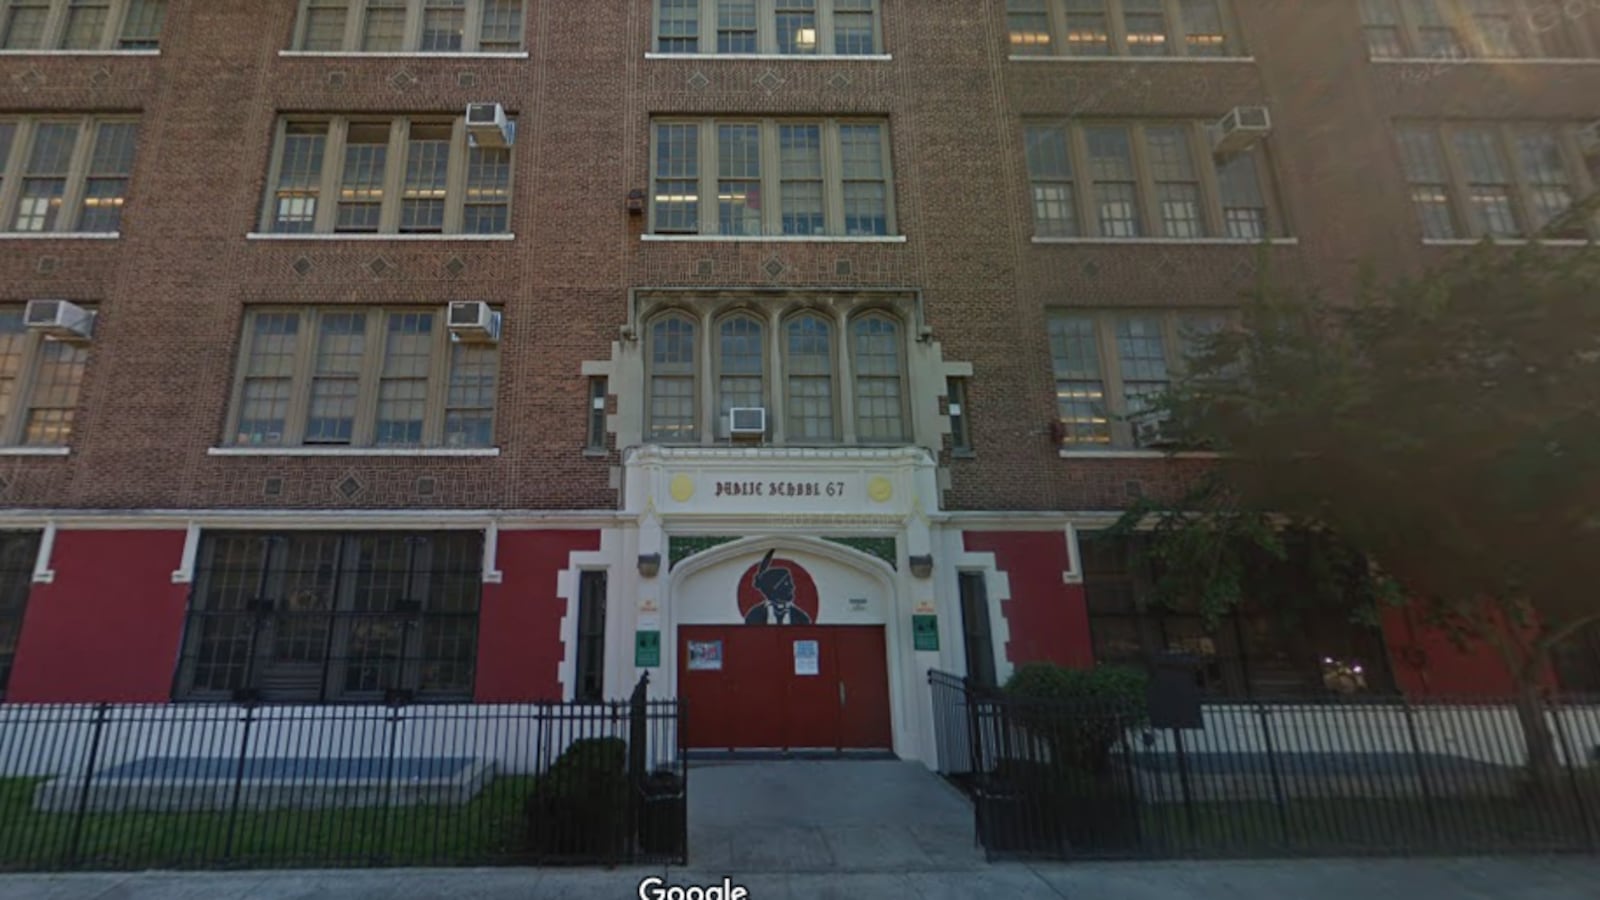 A student accused of stabbing and killing a classmate in 2017 at Urban Assembly for Wildlife Conservation in the Bronx said he was the victim of bullying. The school, which has since been closed, shared a building with P.S. 67.